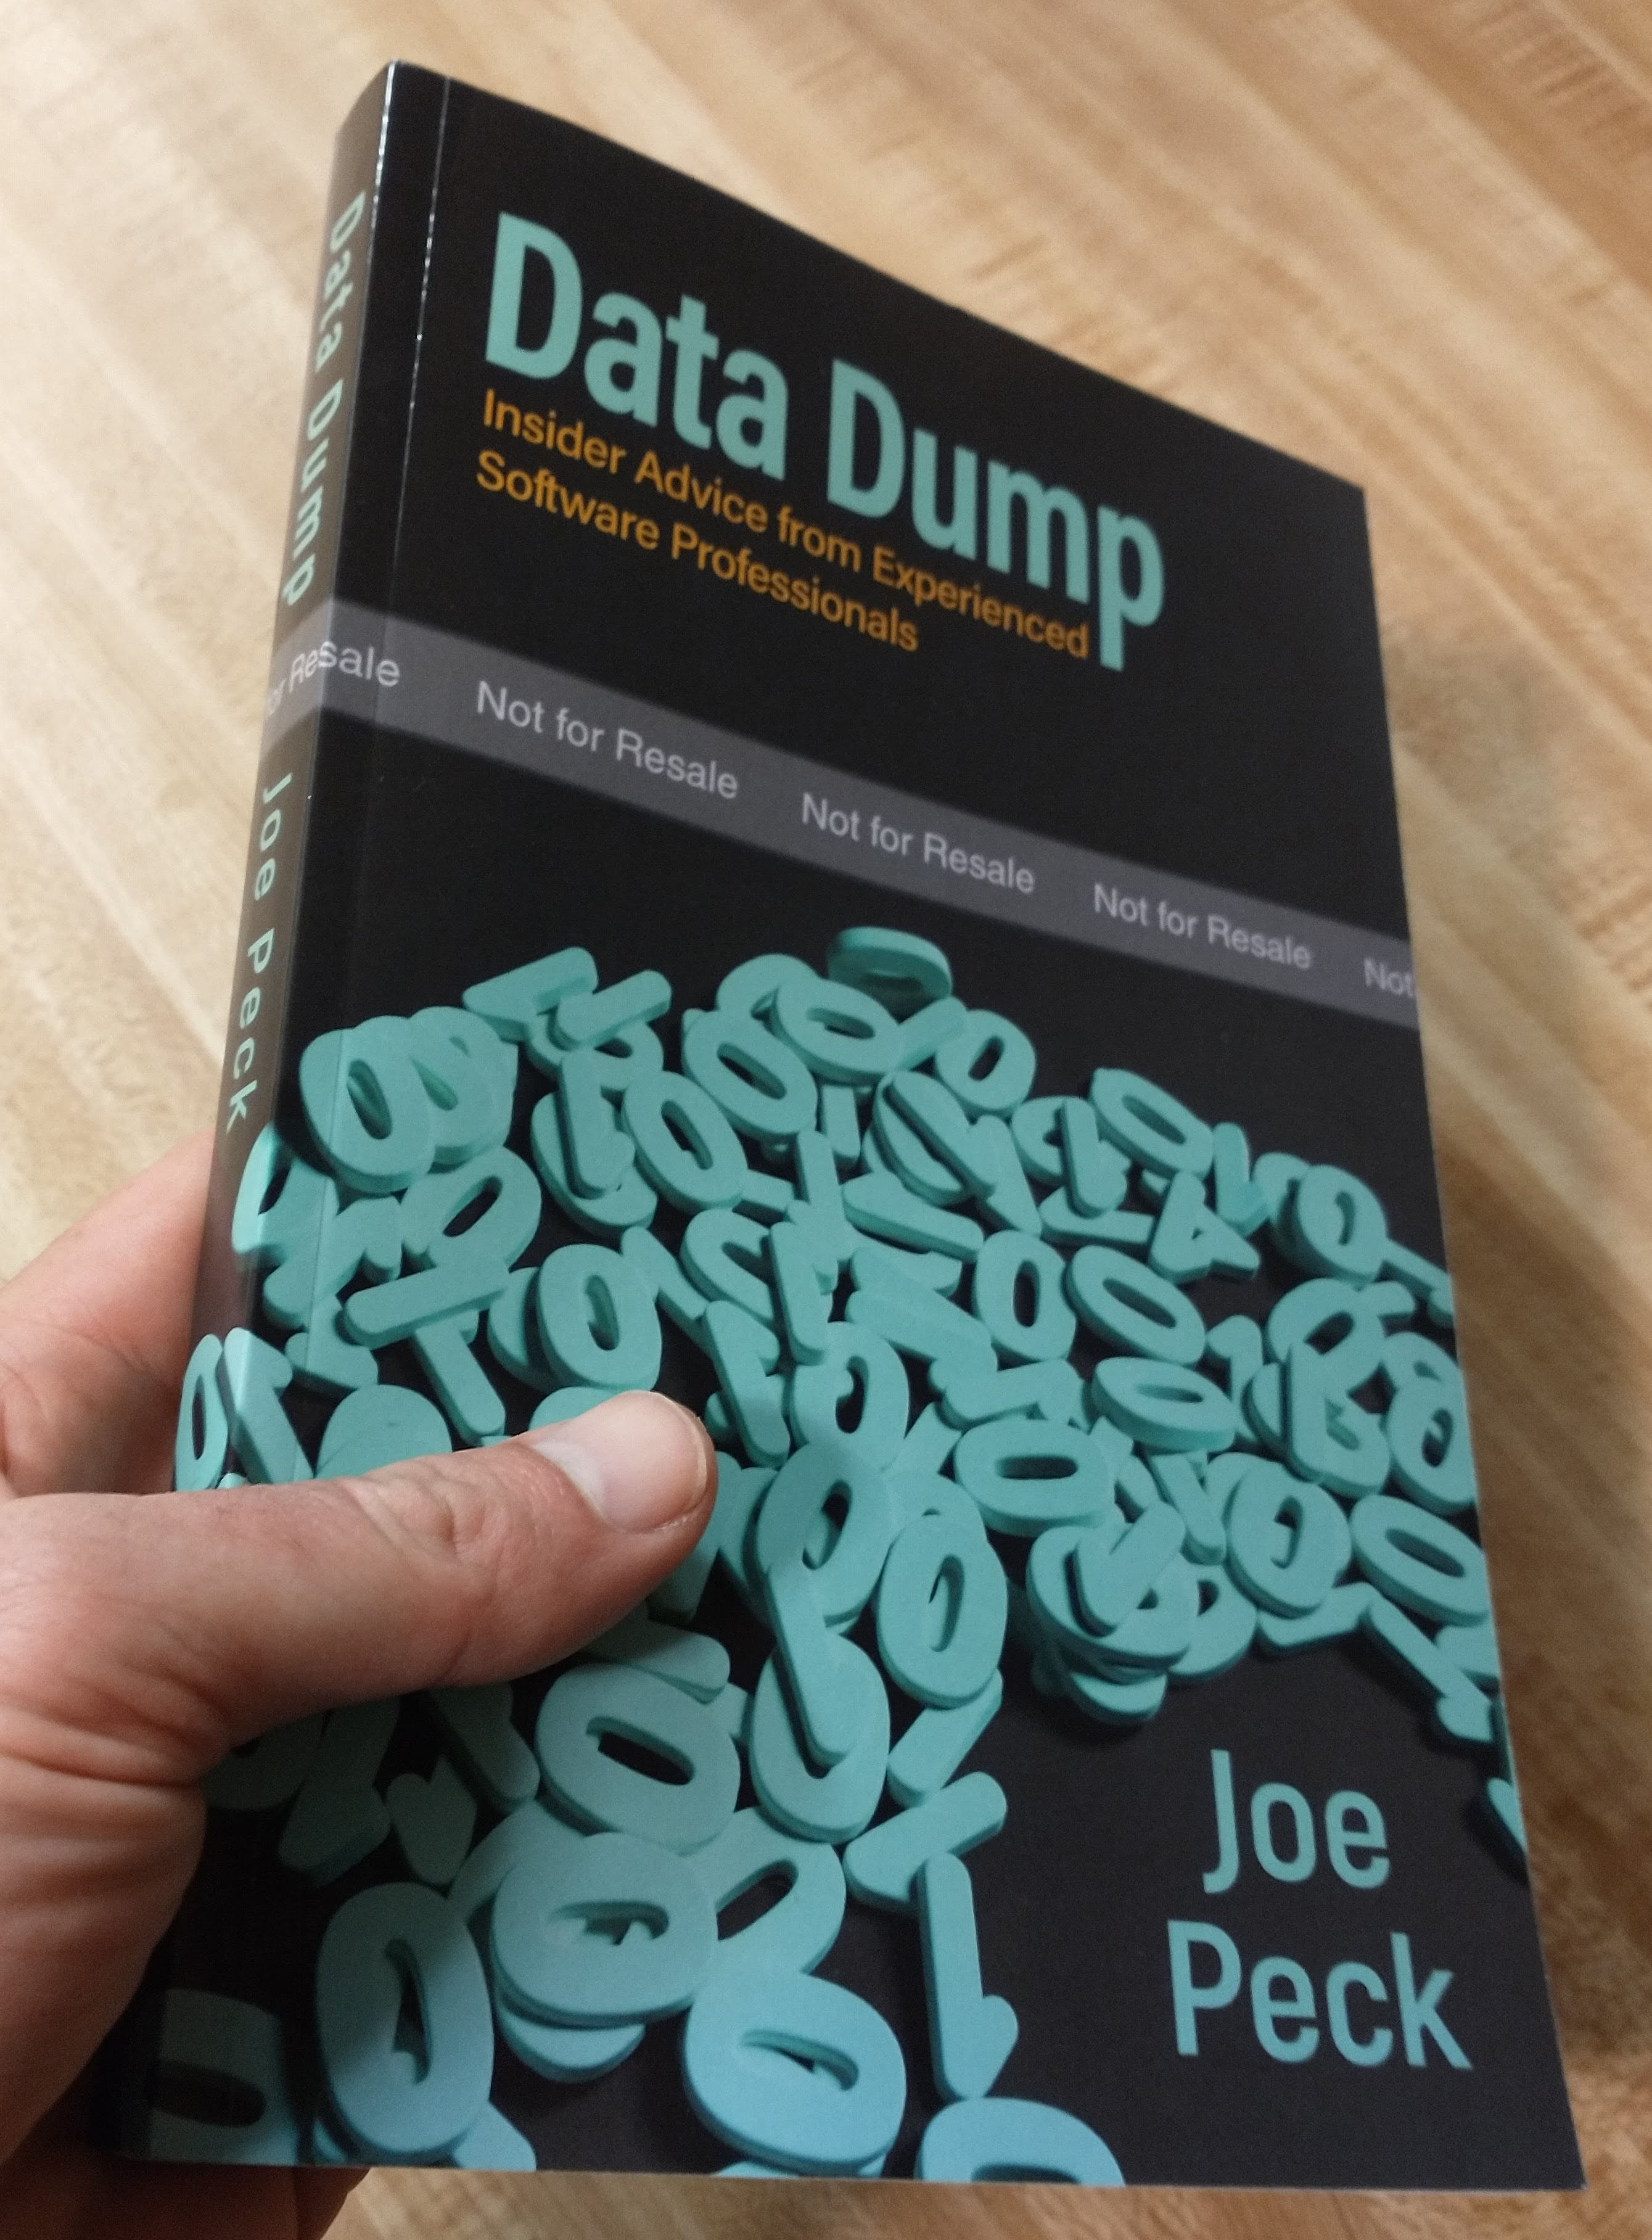 Data Dump paperback really exists